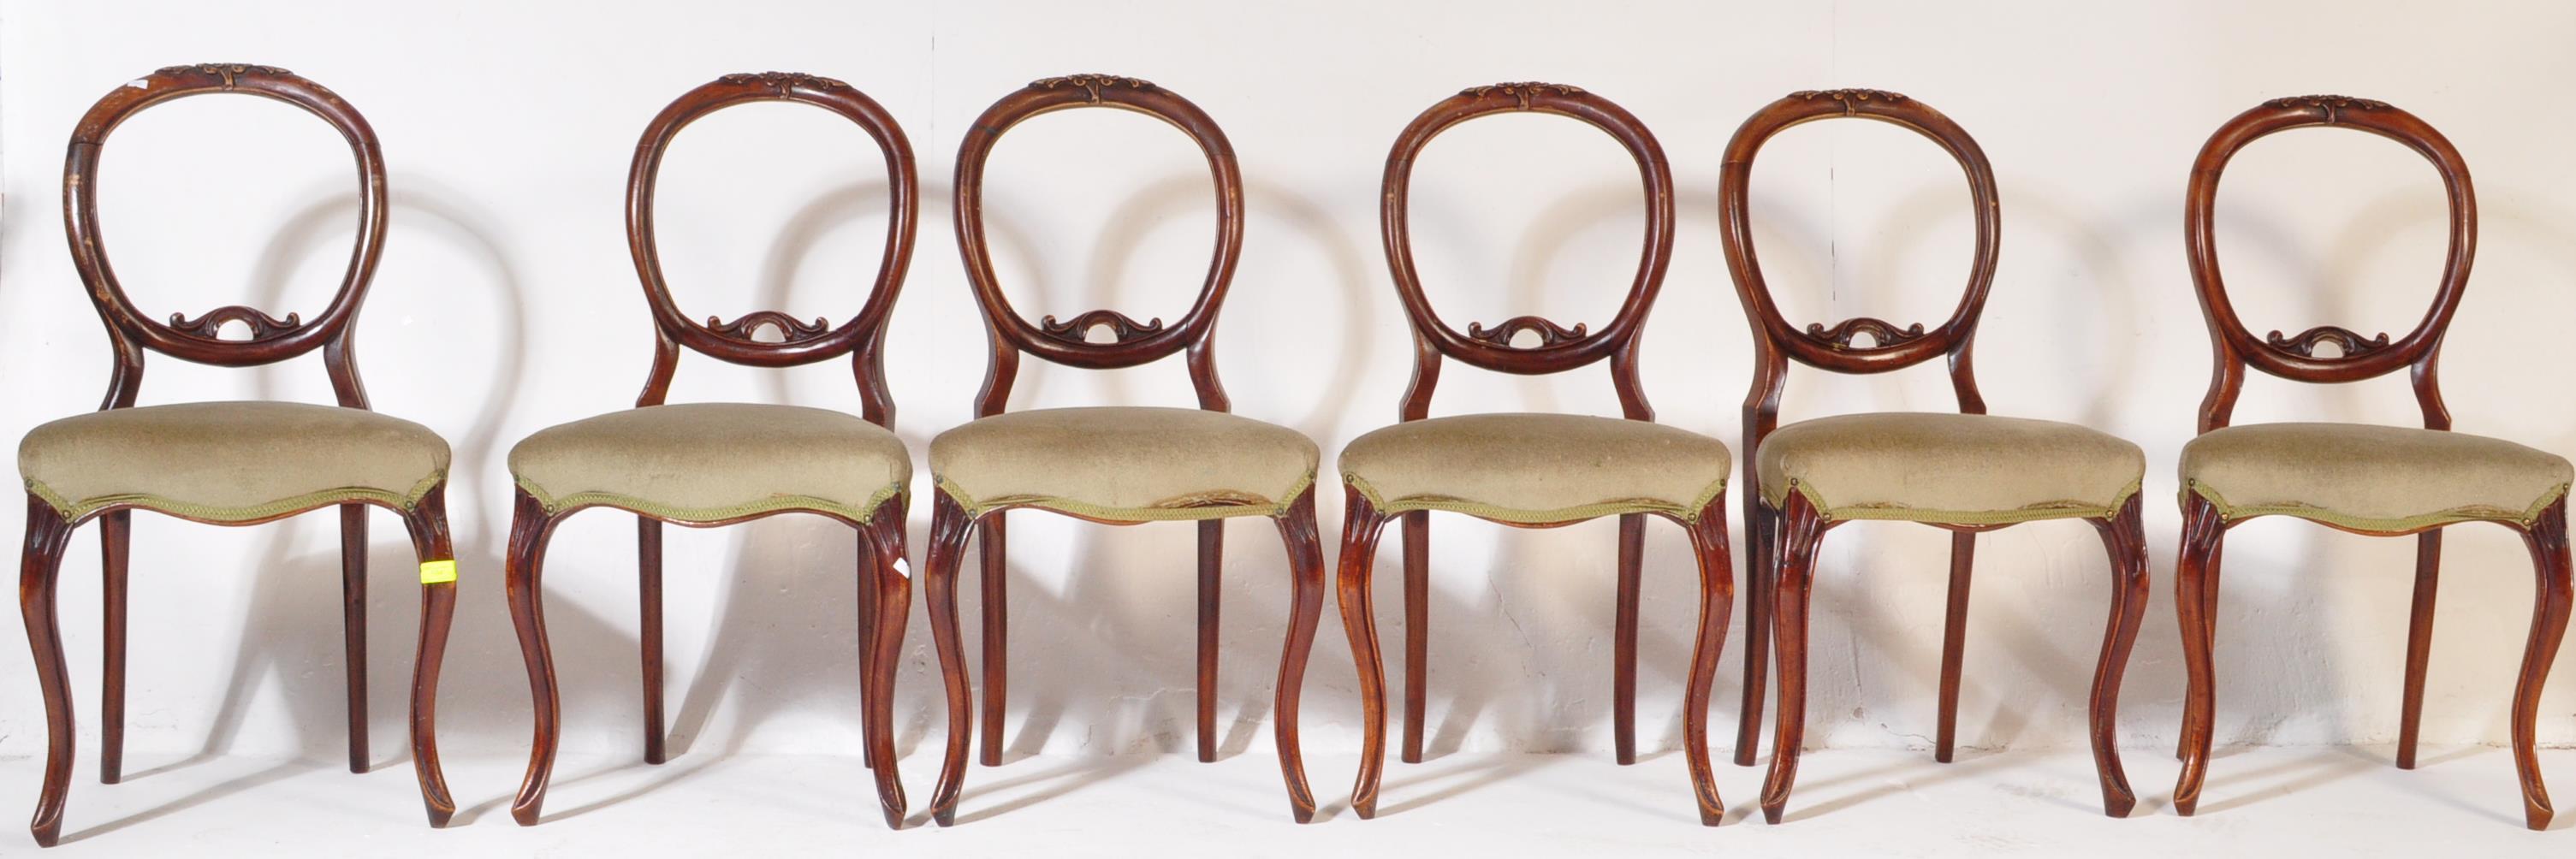 SET OF SIX VICTORIAN 19TH CENTURTY BALLOON BACK CHAIRS